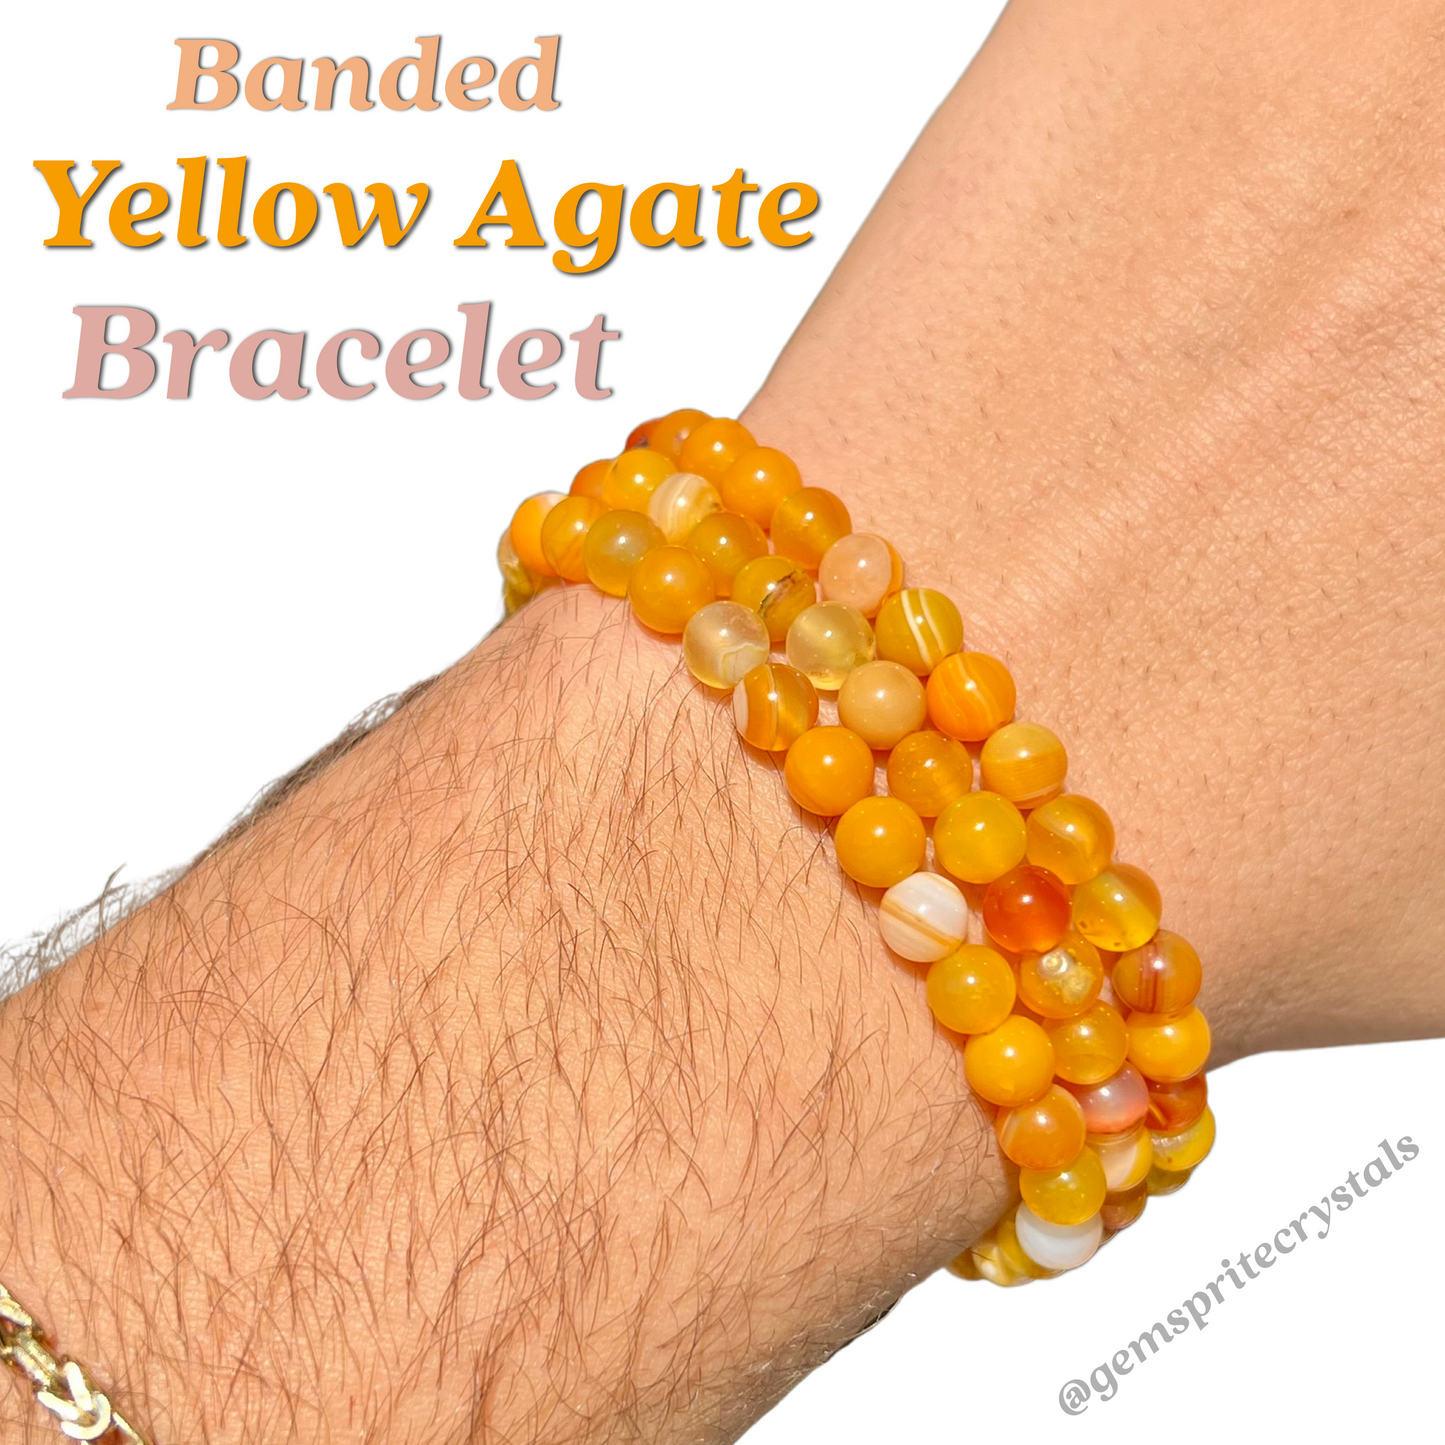 Banded Yellow Agate Bracelet